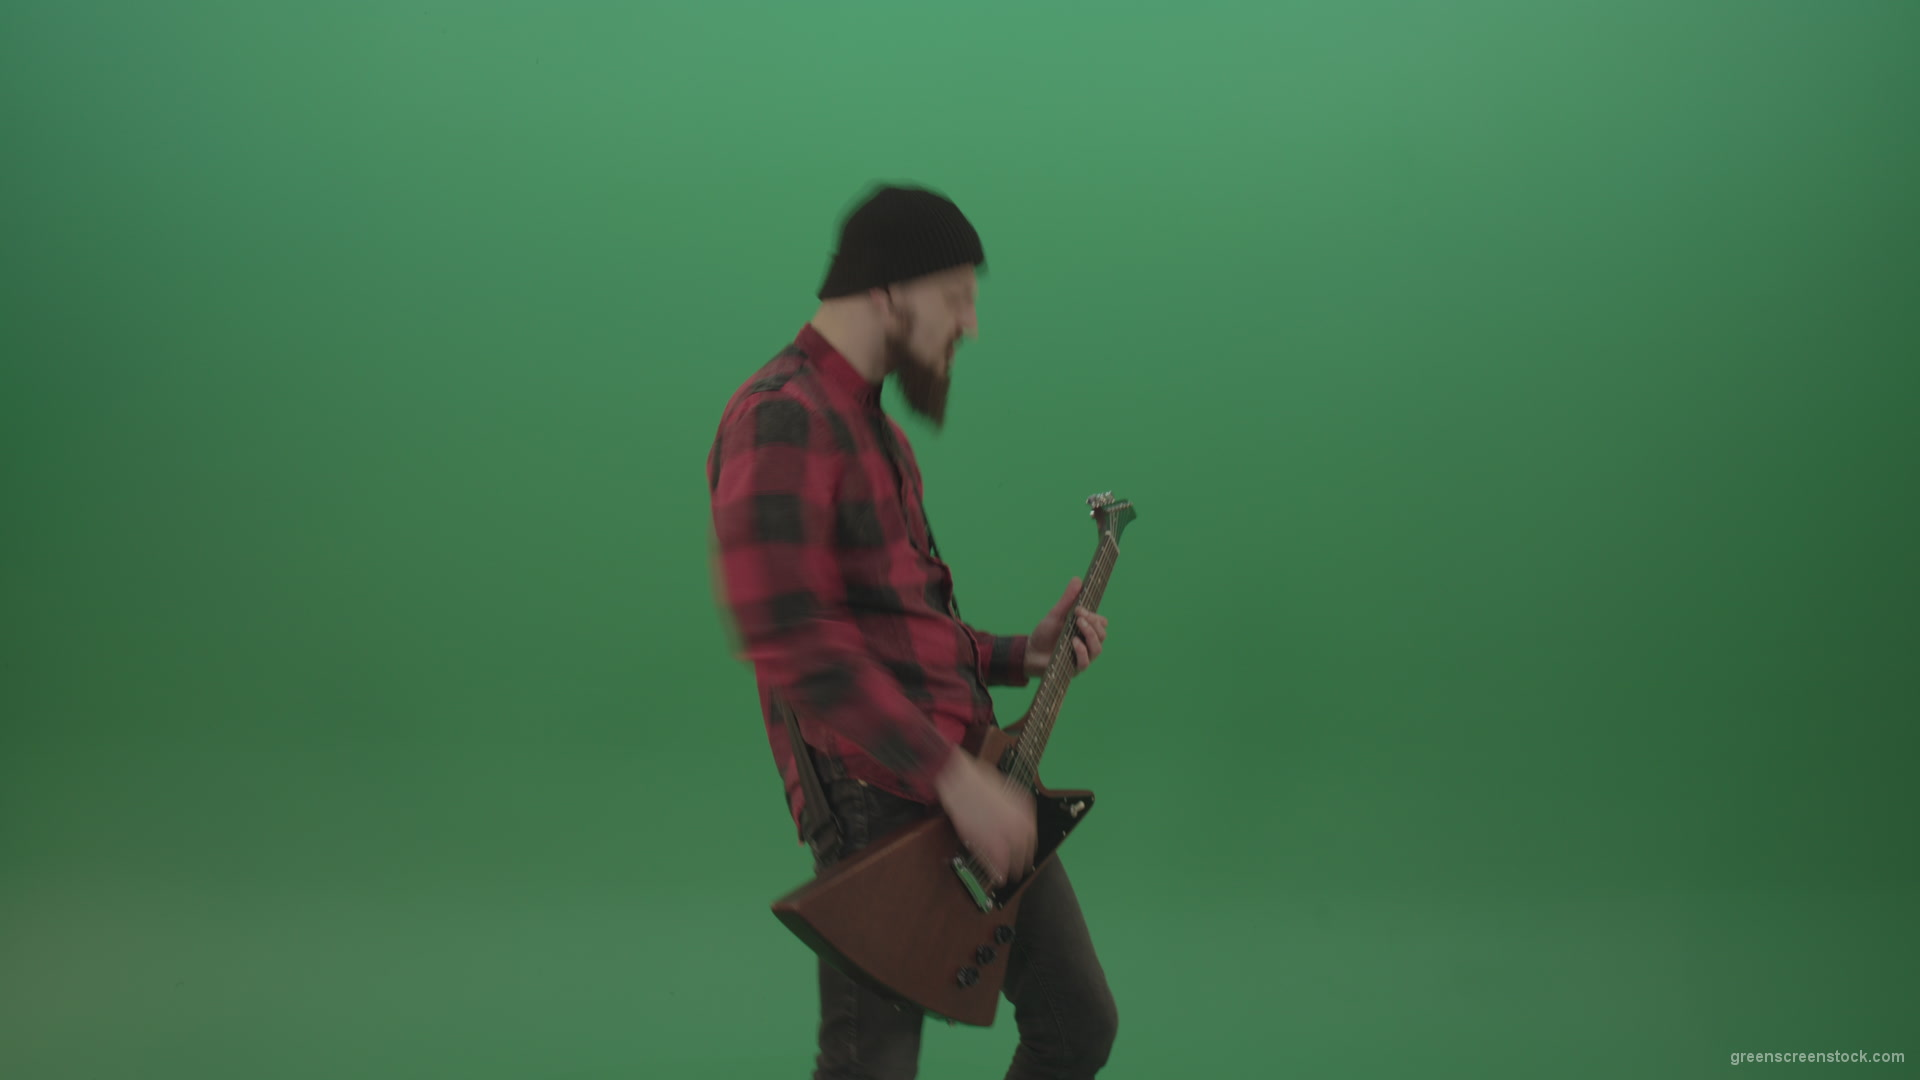 vj video background Young-man-with-beard-play-hardcore-music-on-guitar-in-side-view-on-green-screen-chromakey-background_003